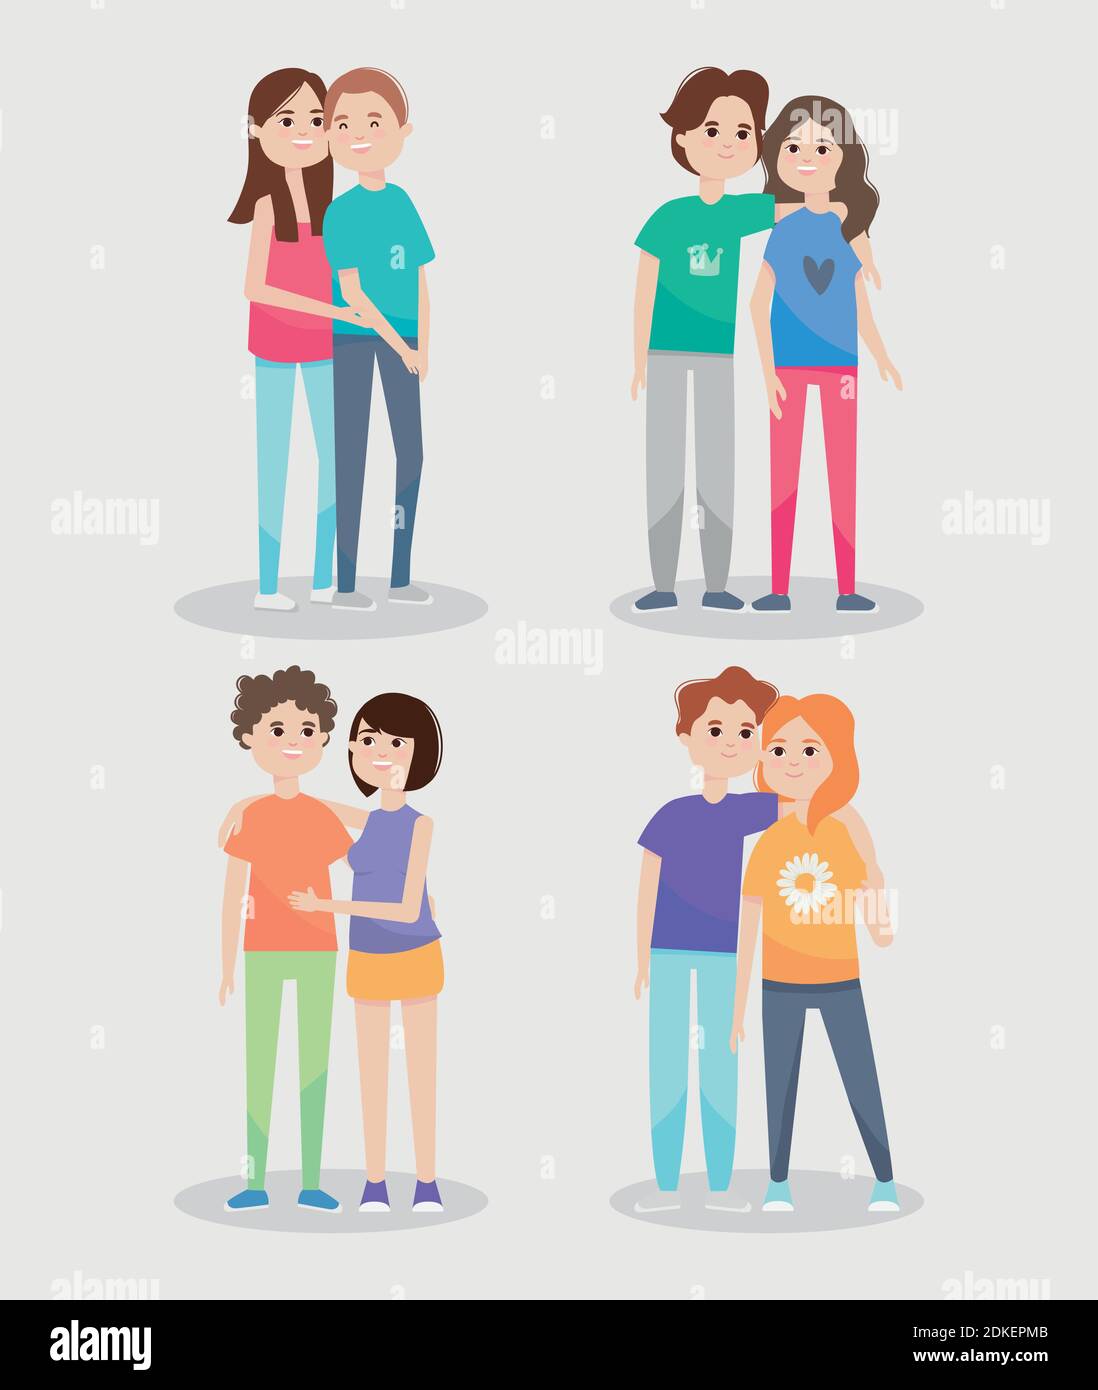 icon set of happy couples over white background, colorful design, vector illustration Stock Vector